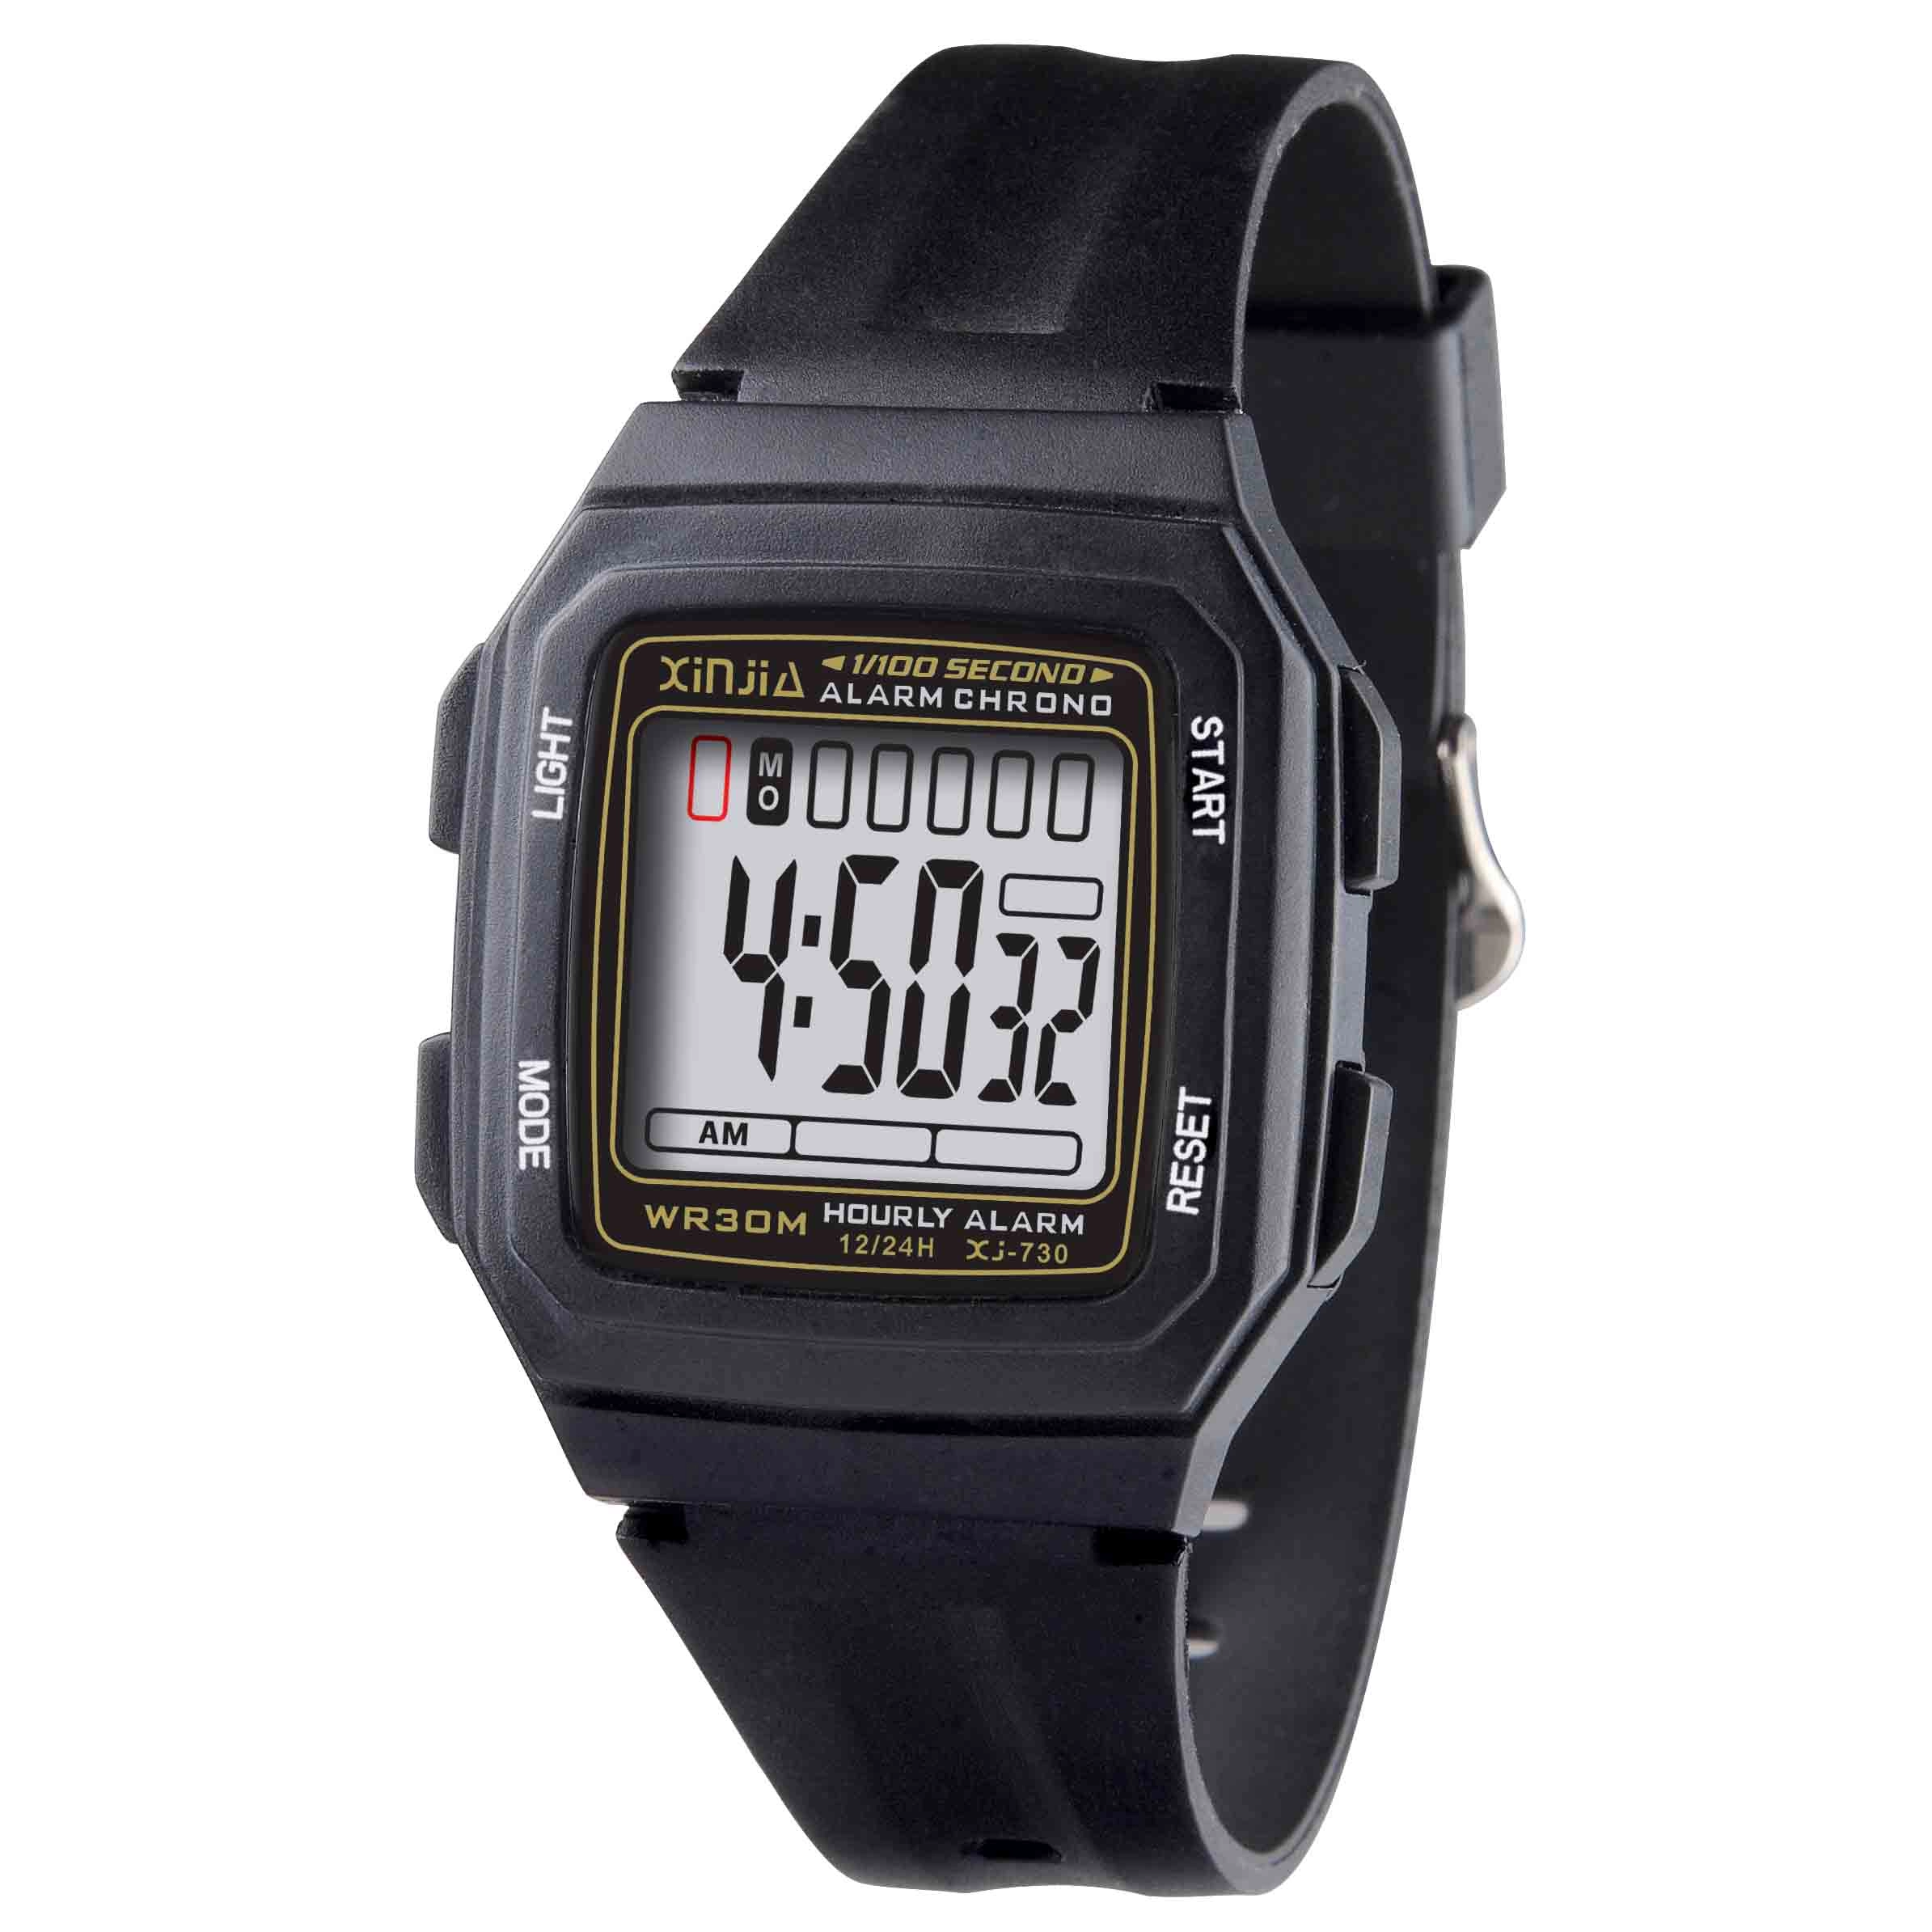 Portable Square Digital Water Resistant Wrist Watch